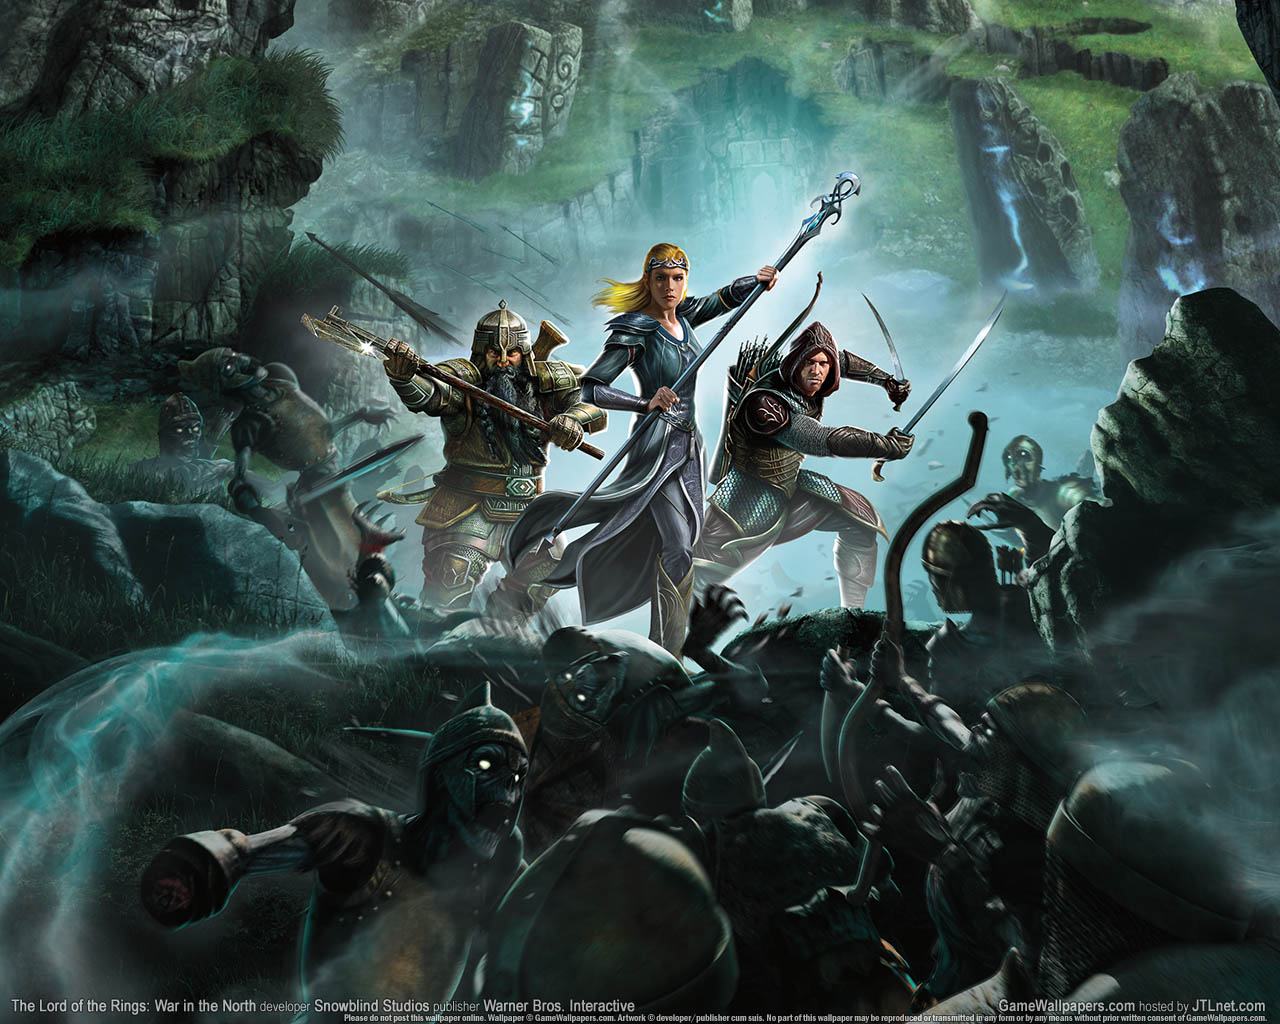 The Lord of the Rings: War in the North fond d'cran 04 1280x1024